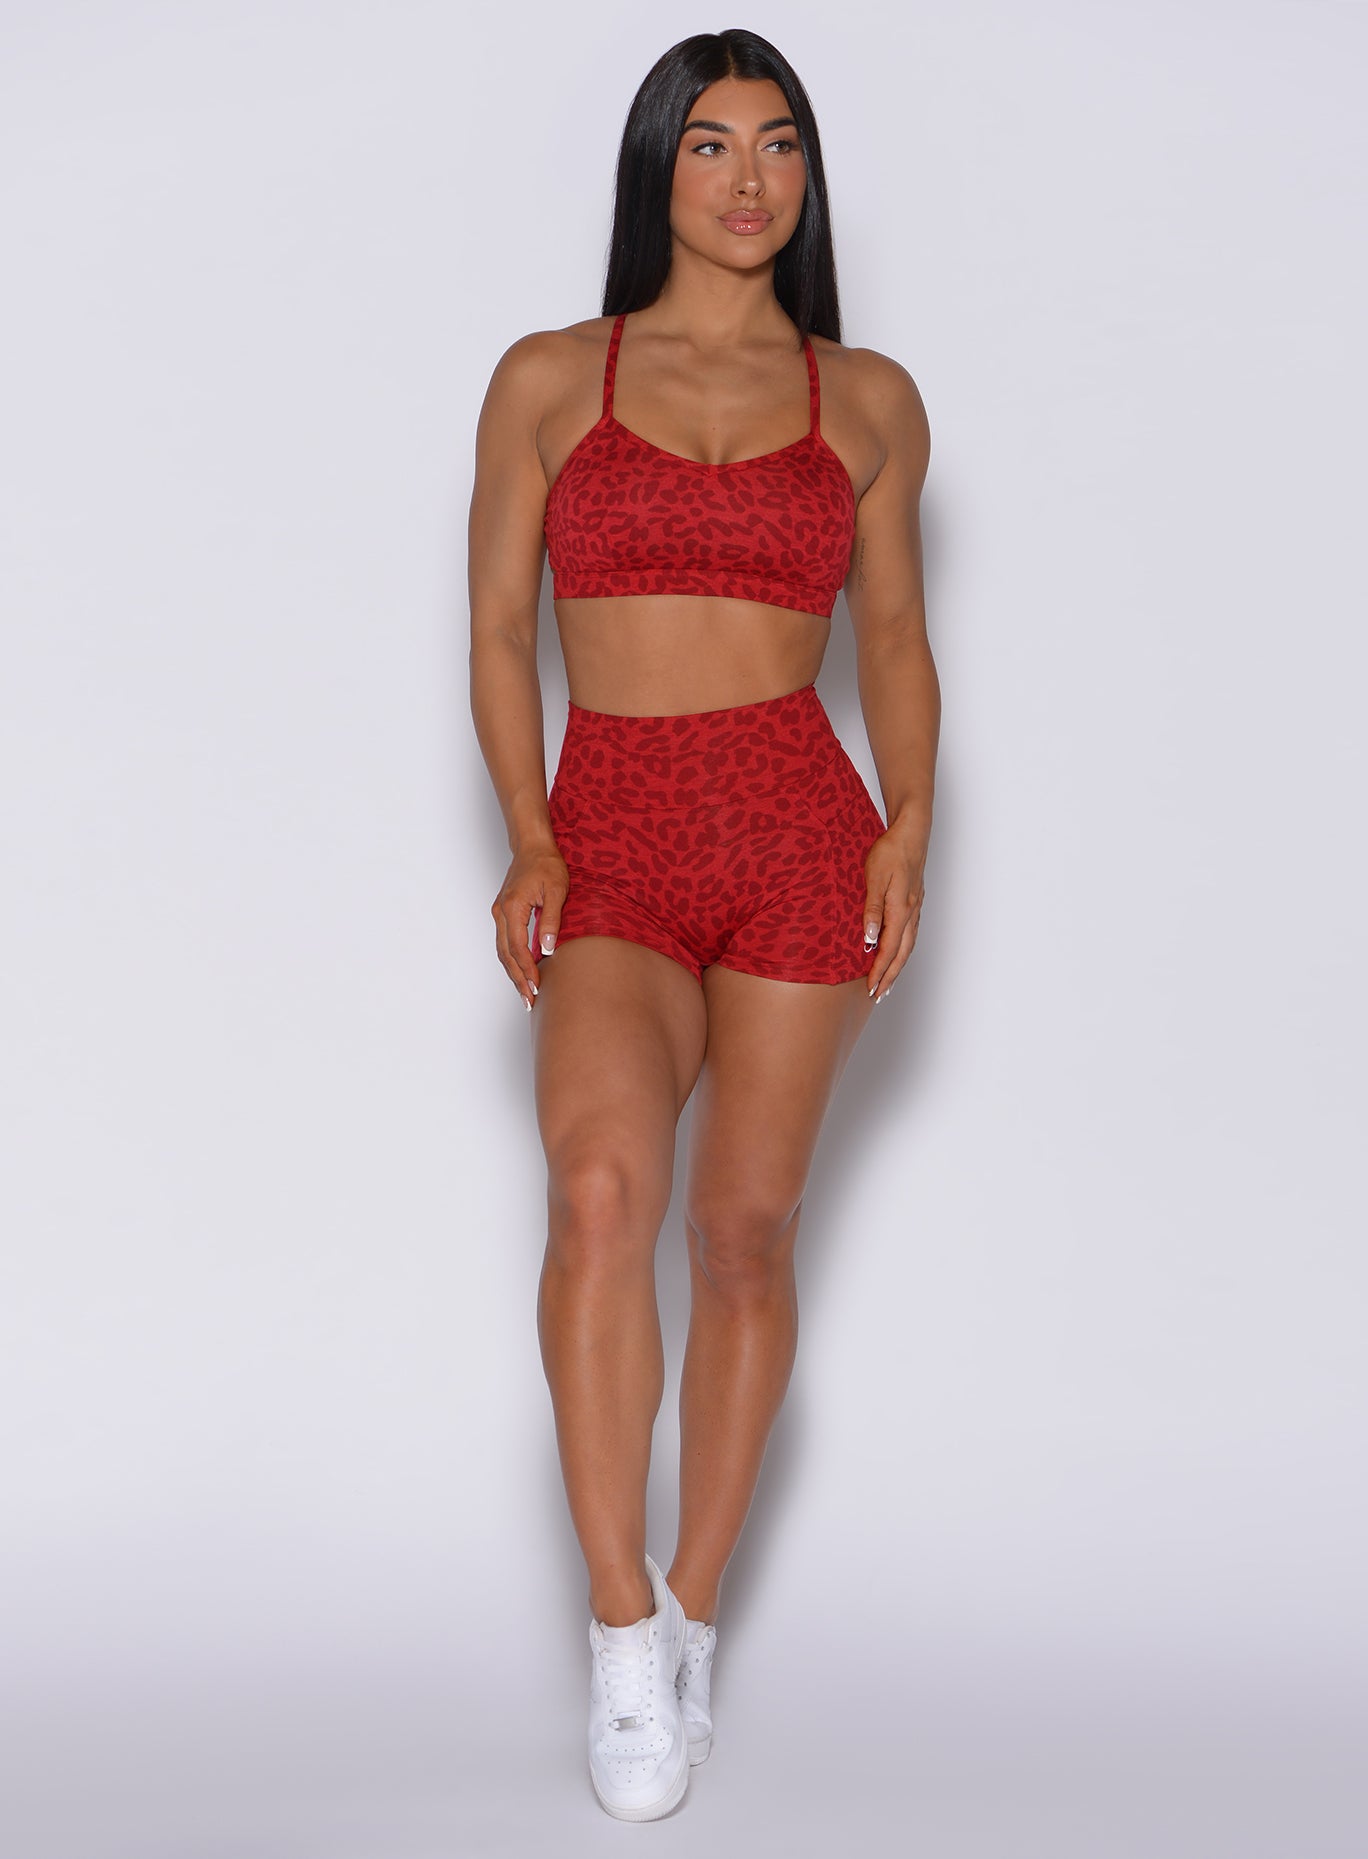 Front  profile view of a model wearing our curves shorts in red cheetah color along with a matching bombshell sports bra